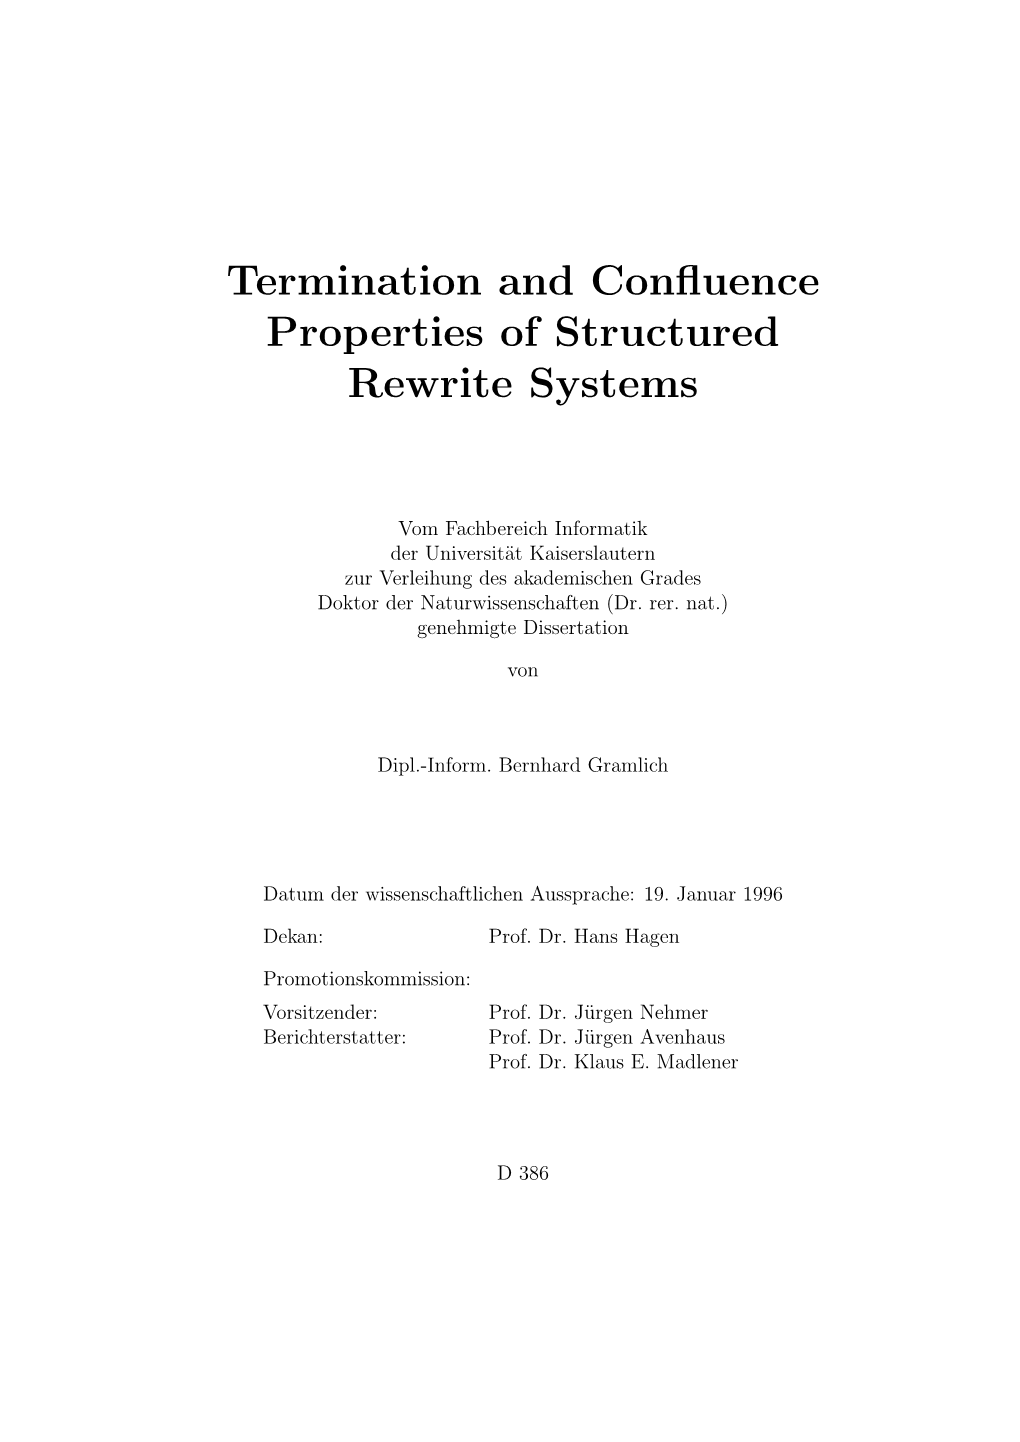 Termination and Confluence Properties of Structured Rewrite